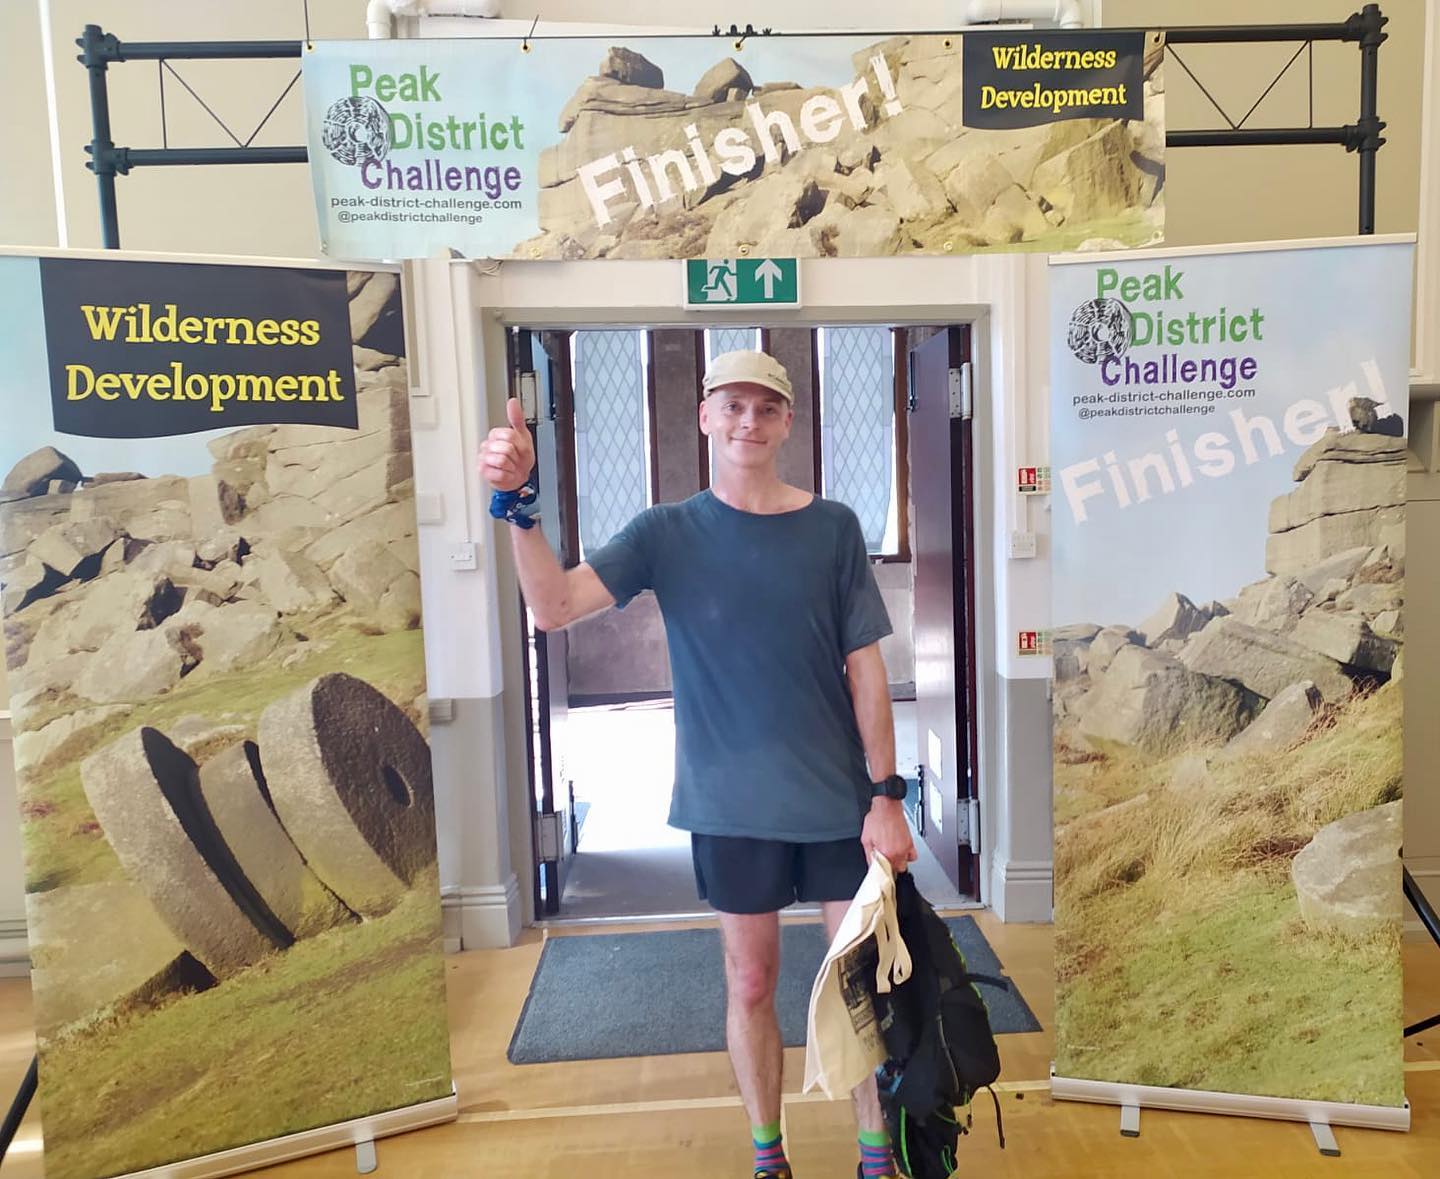 Congratulations to Will Carver who regained his 2019 title on the Peak District Challenge Bronze ...